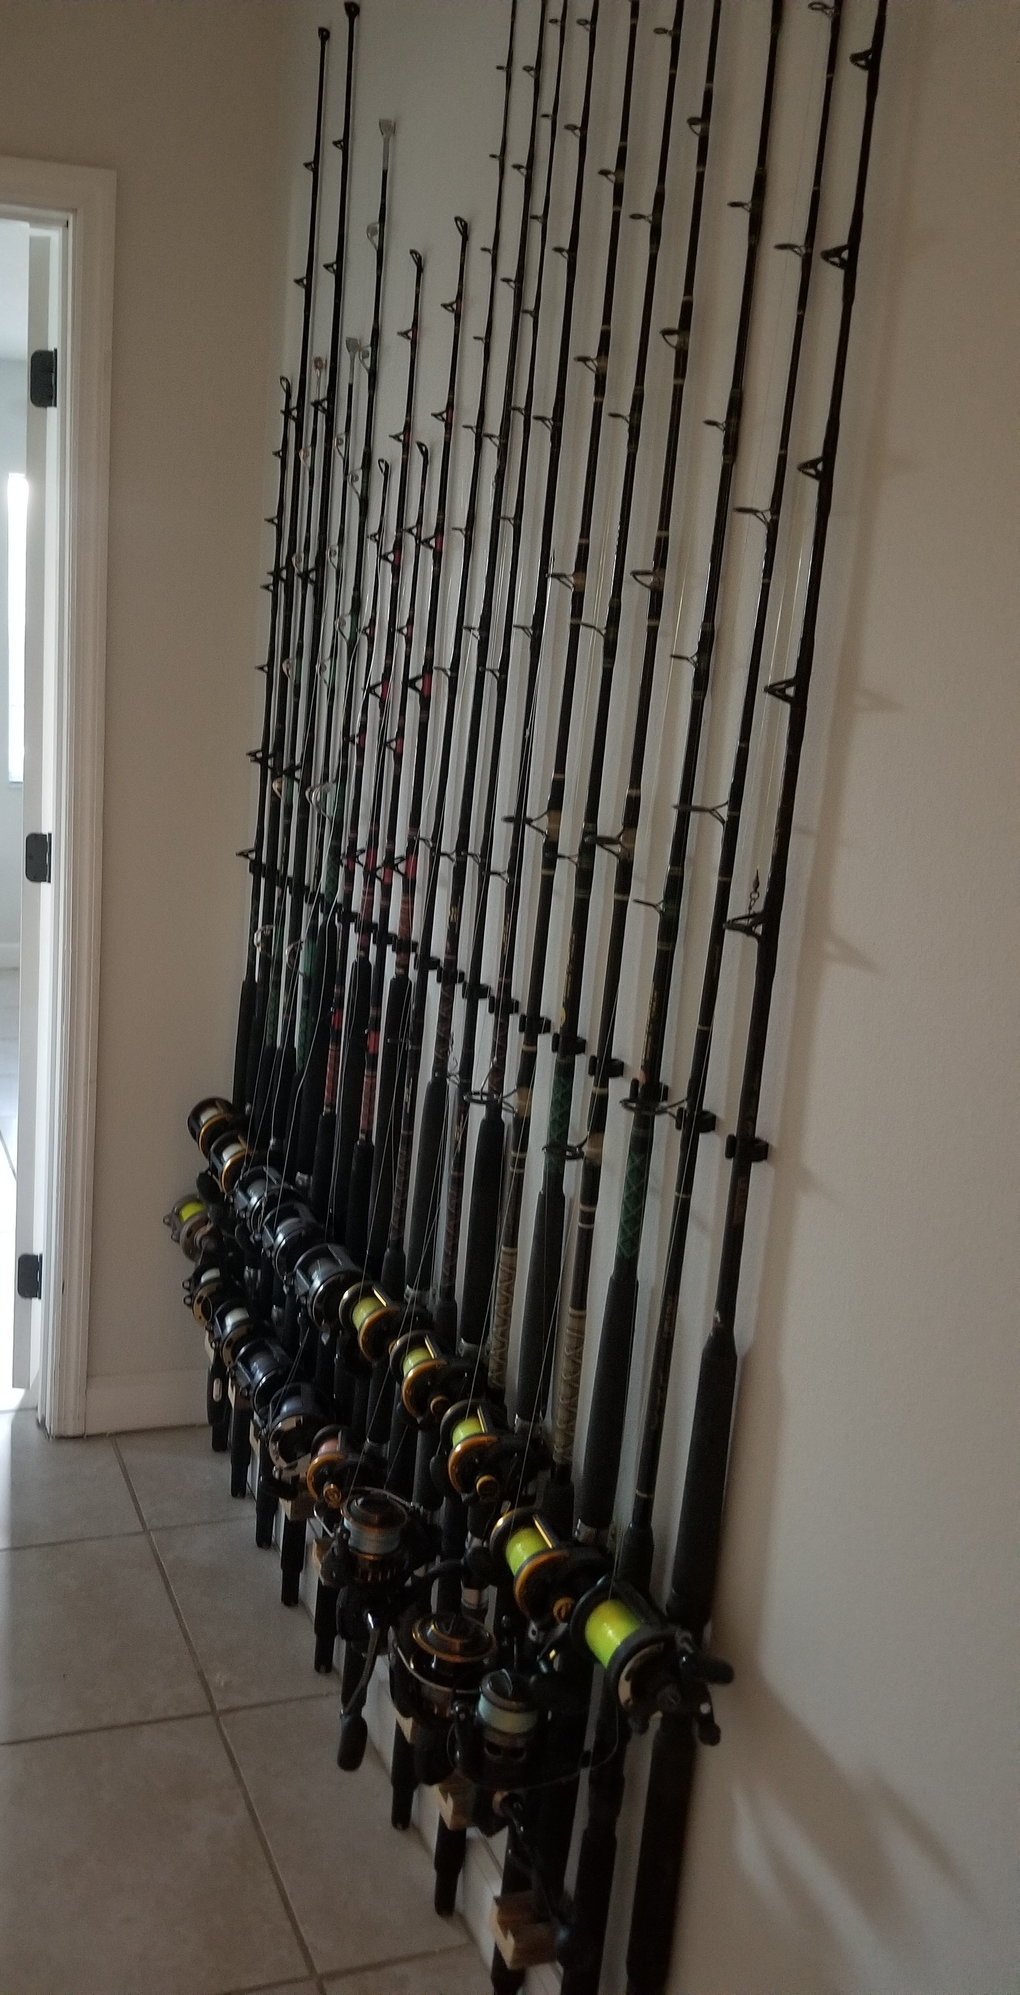 Straight Butt Wall Storage - The Hull Truth - Boating and Fishing Forum